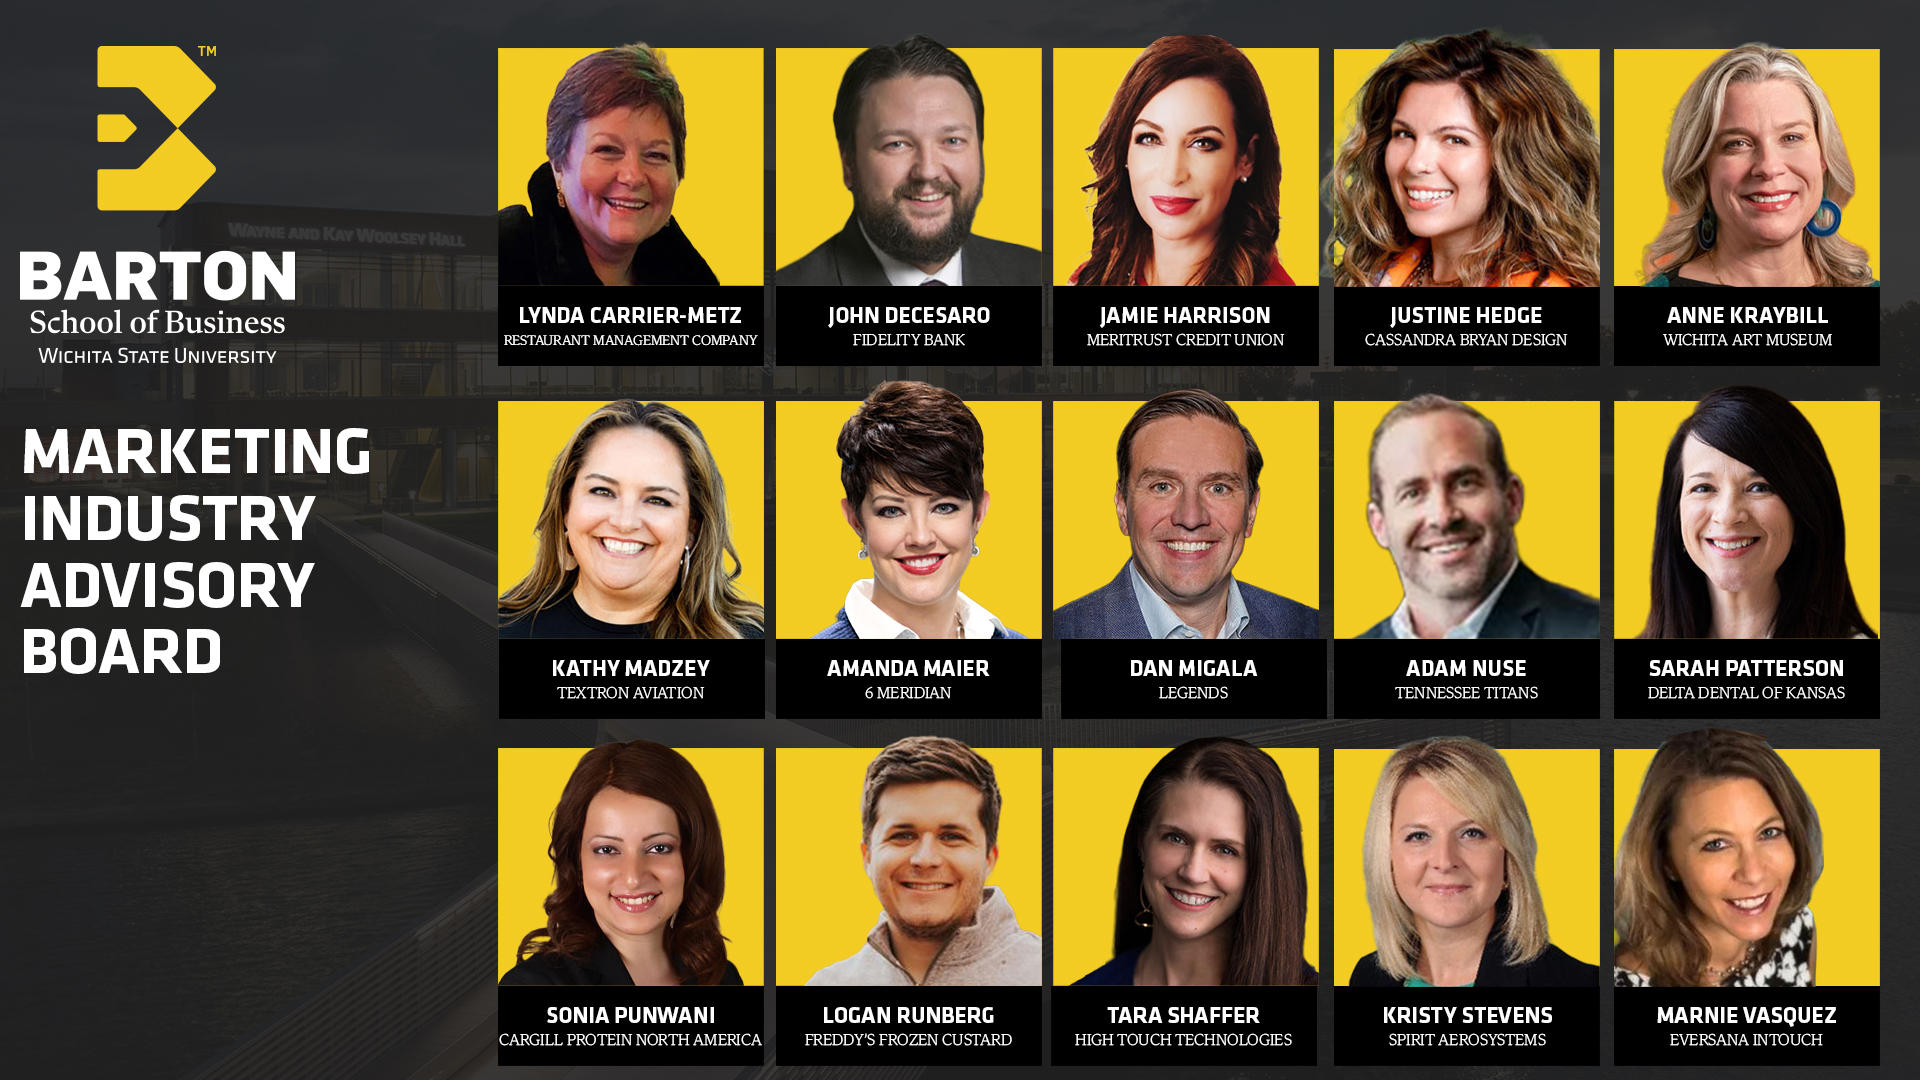 Fifteen marketing leaders from across the country have been selected to serve on the board.